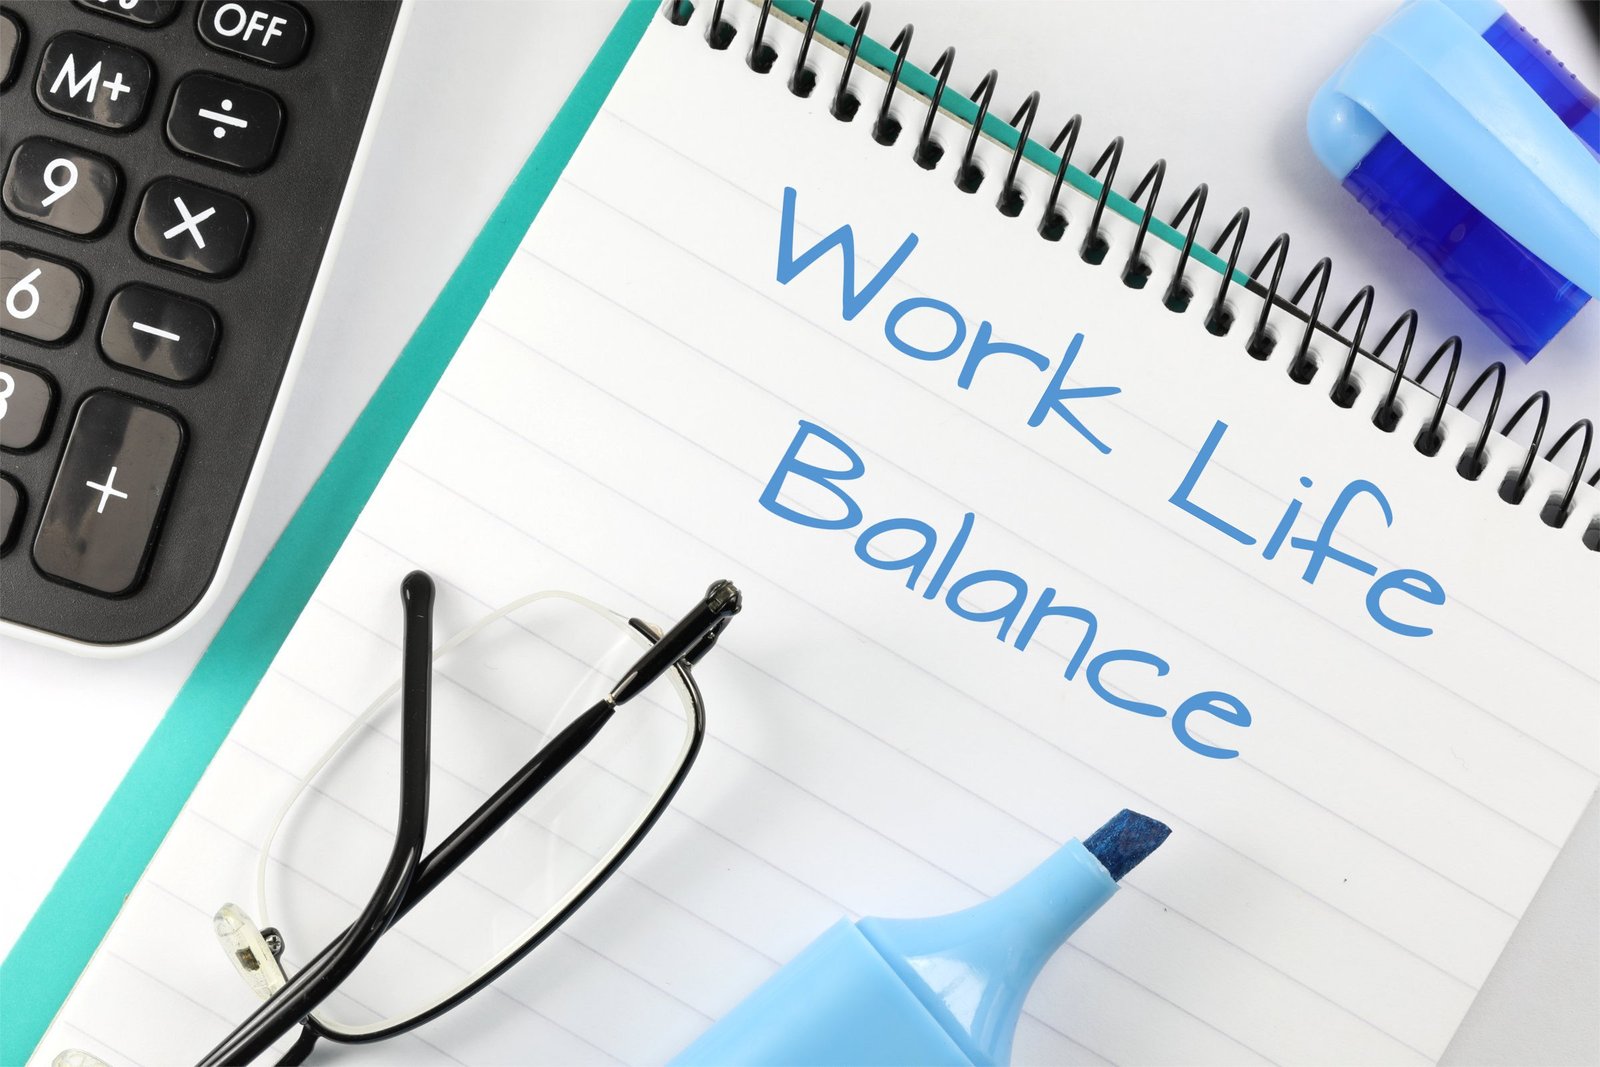 Maintaining Work-Life Balance in a Remote Setting